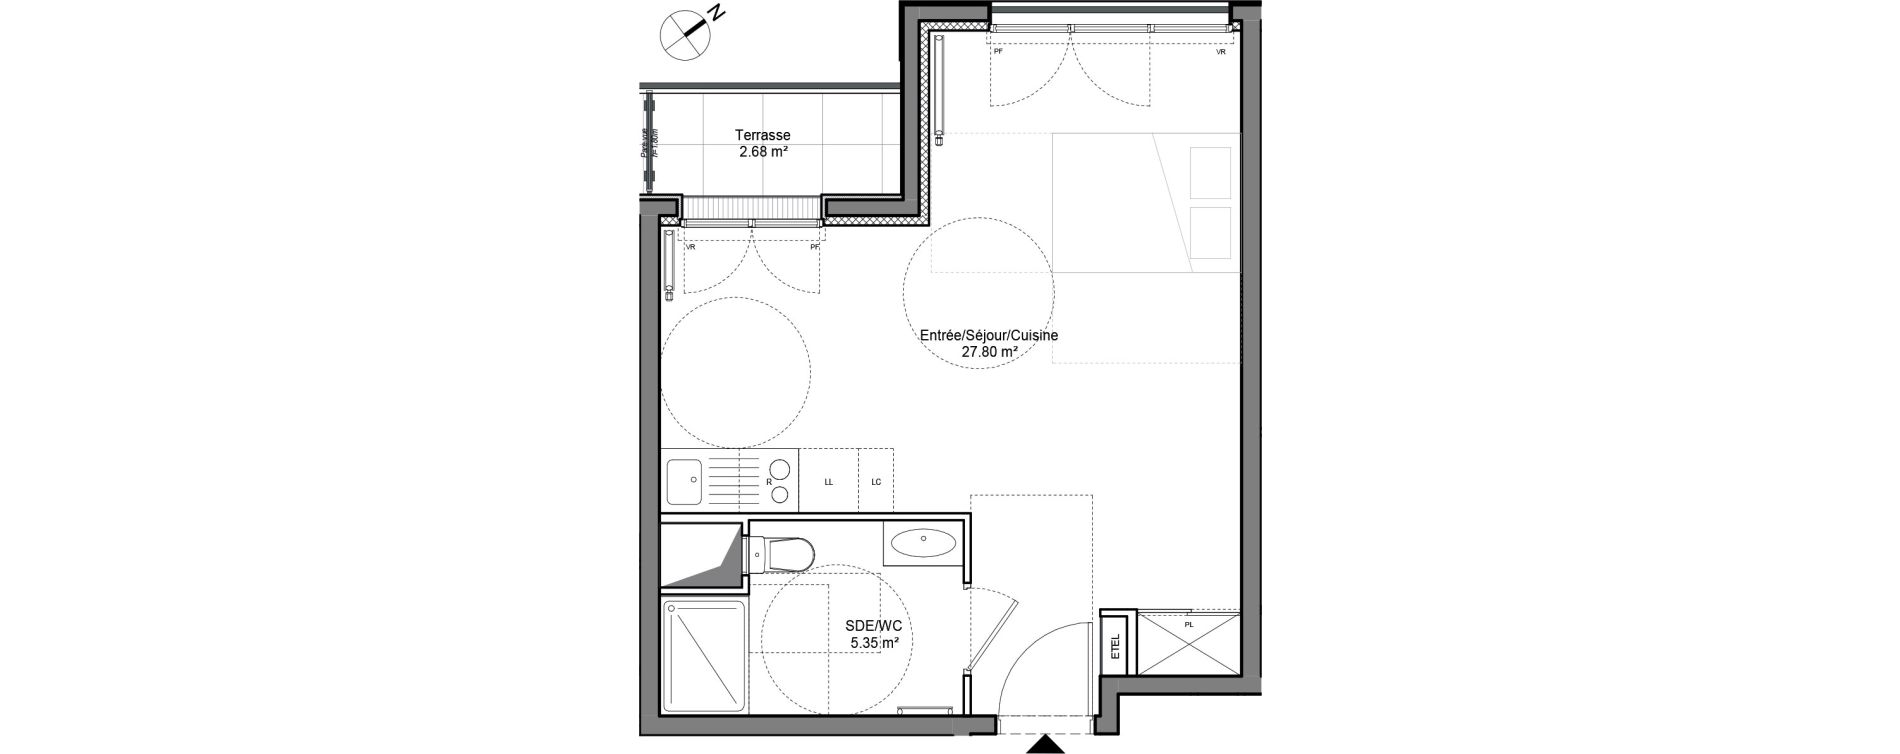 Appartement T1 de 33,15 m2 &agrave; Ch&acirc;tenay-Malabry Chatenay malabry voltaire